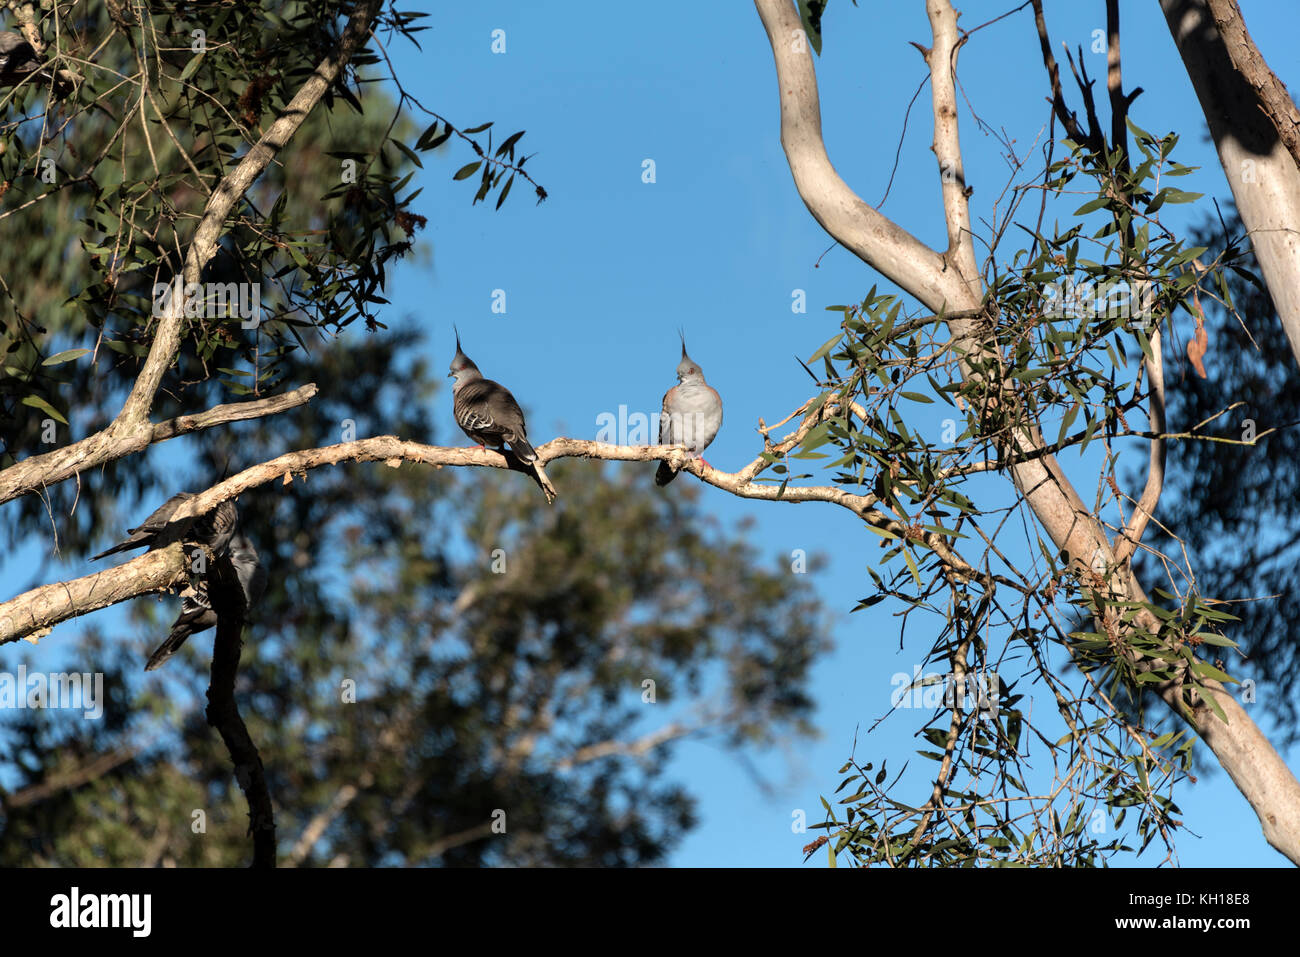 A flock of Crested Pigeons or Australian pigeons. It is a native of Australia. Stock Photo